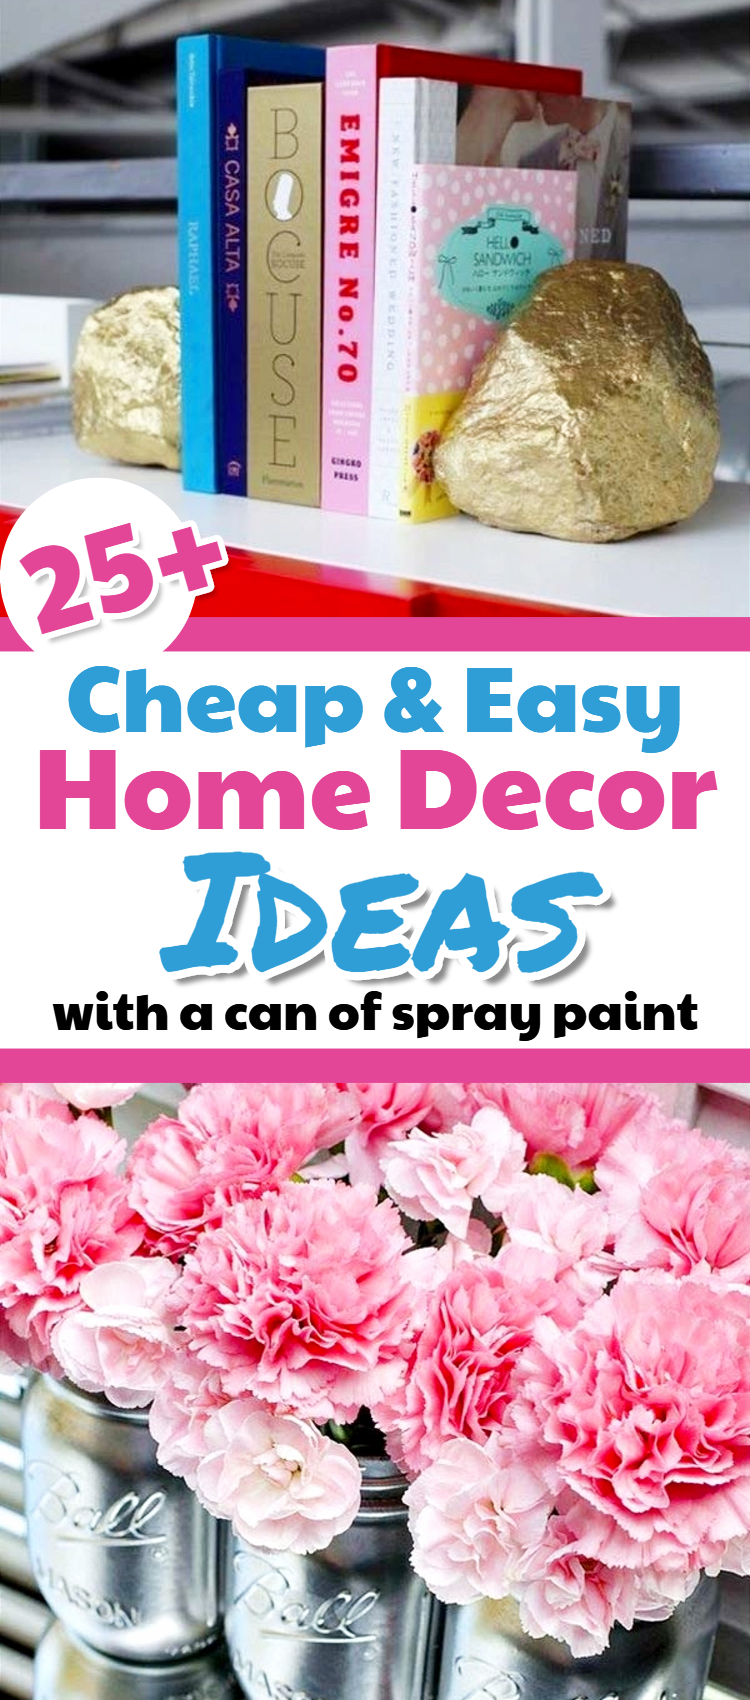 Cheap Home Decorating Ideas - with a simple can of spray paint.  Decorating on a budget, decorating hacks, decorating on a dime, DIY home decor on a budget, easy home decor, budget apartment decorating and low cost home decor